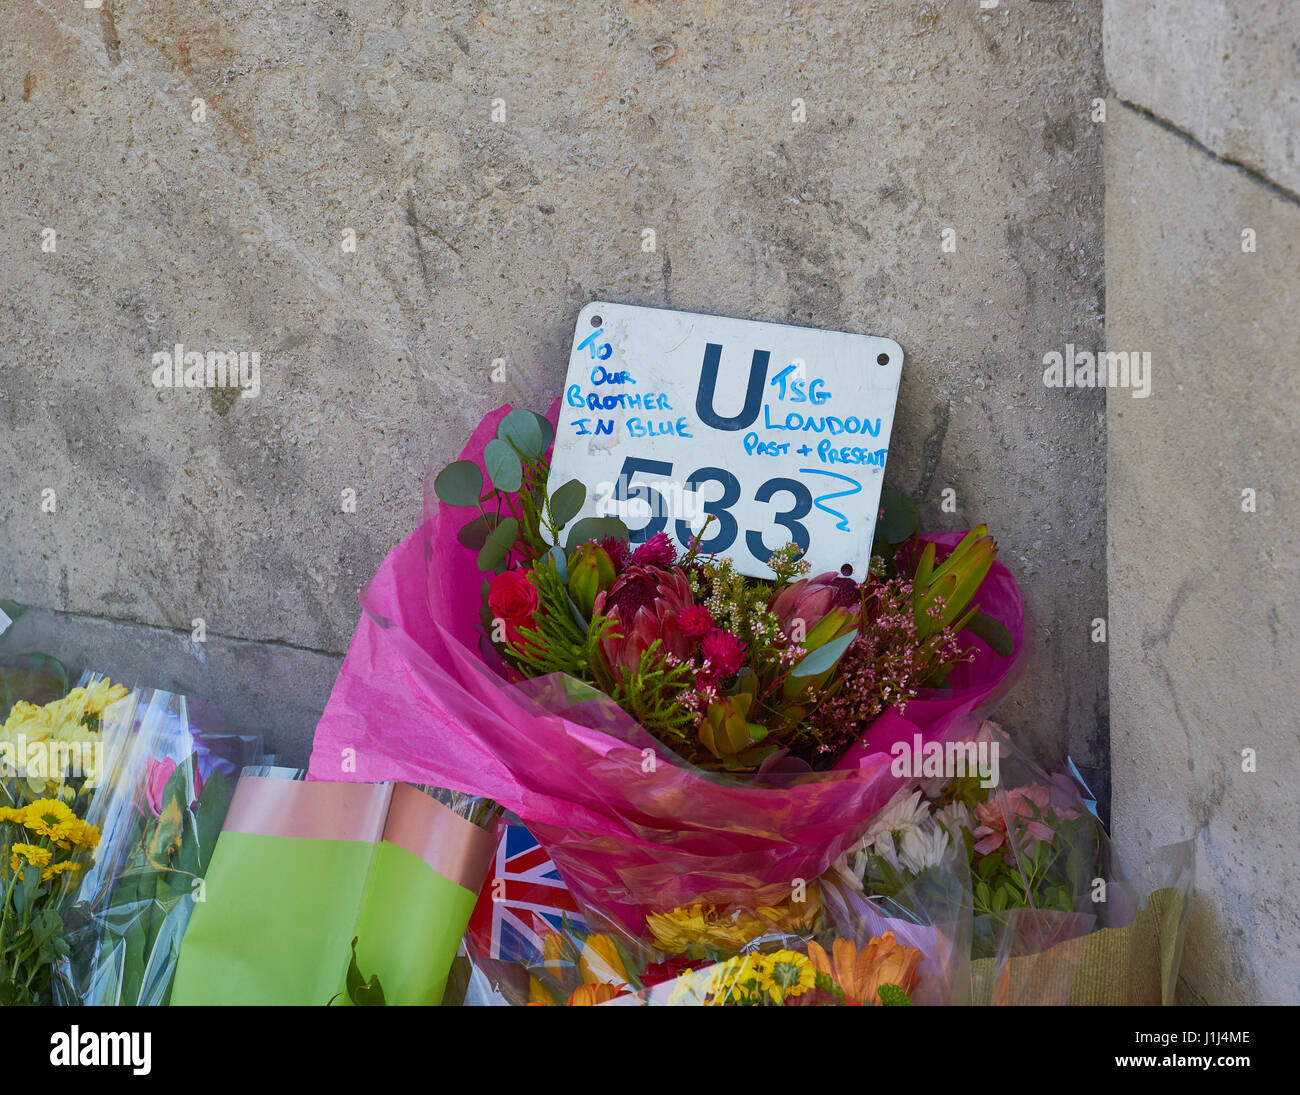 Flowers and tributes to PC Keith Palmer hero and victim in the Westminster terrorist attack, London, England Stock Photo